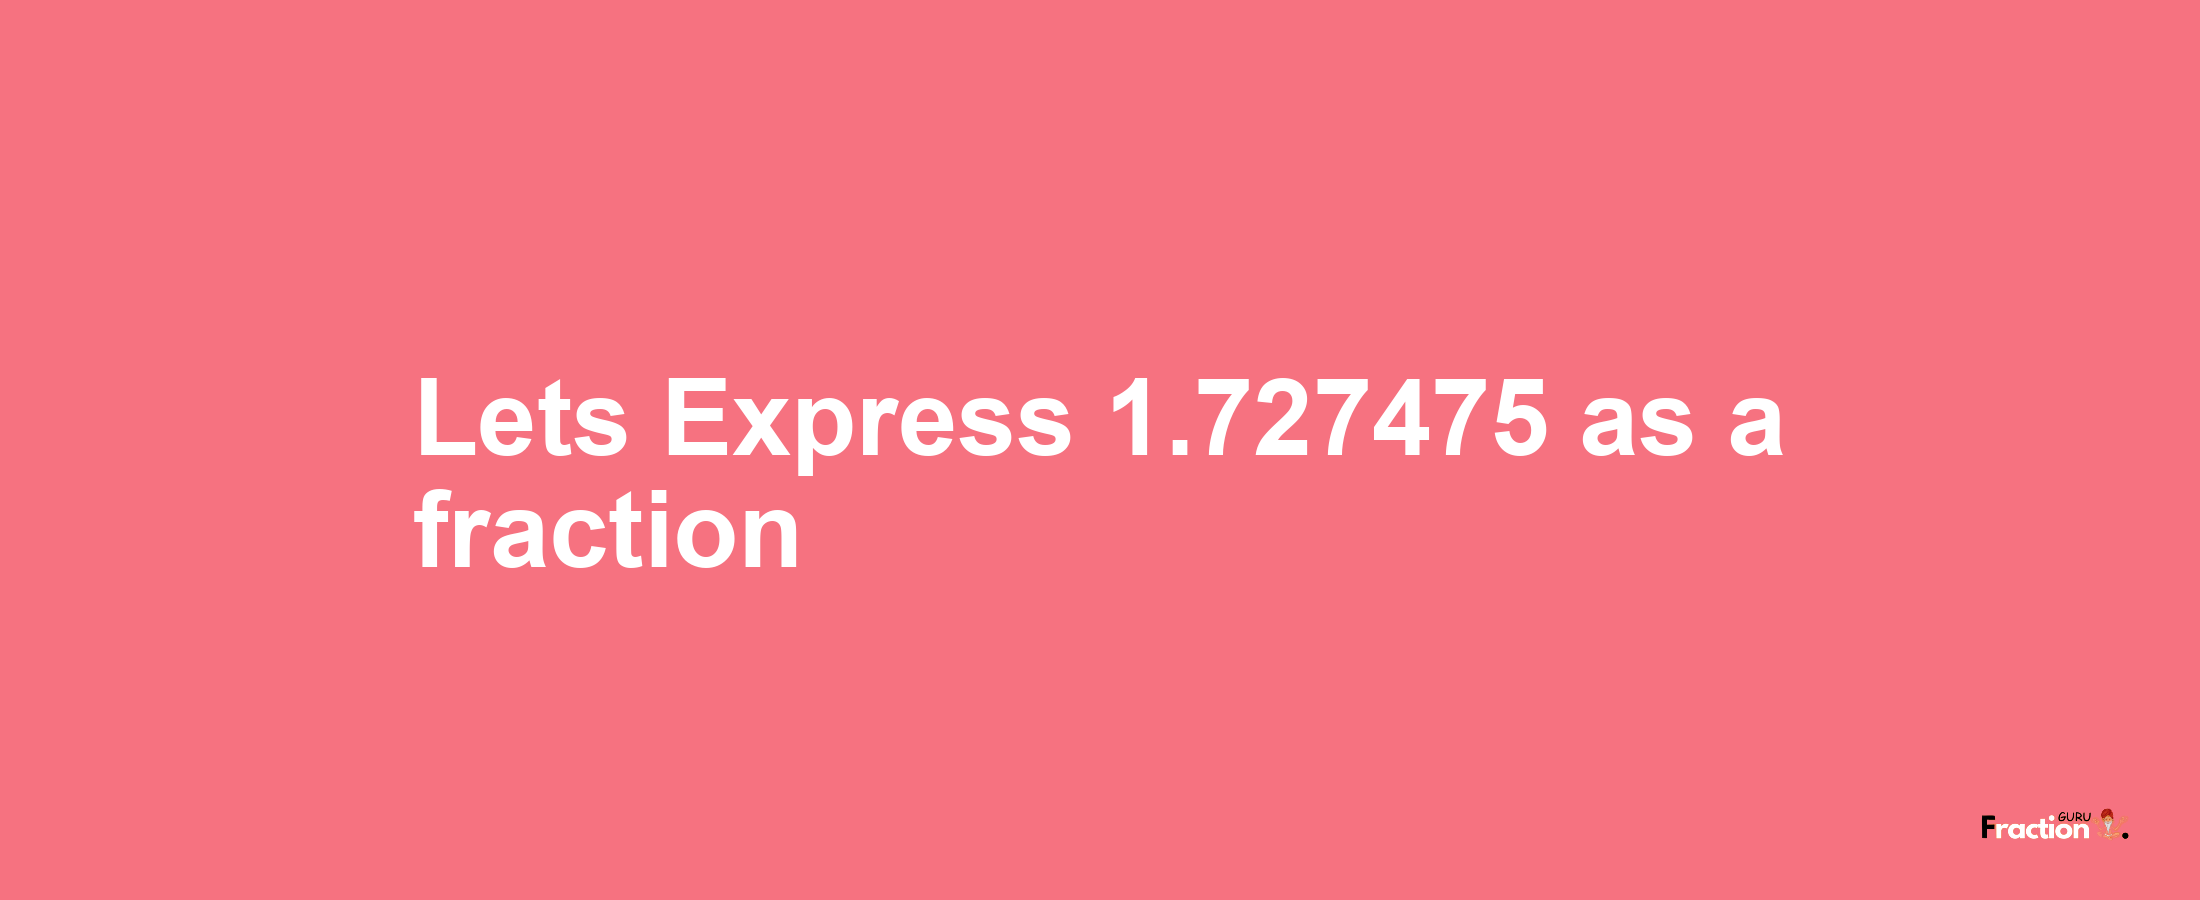 Lets Express 1.727475 as afraction